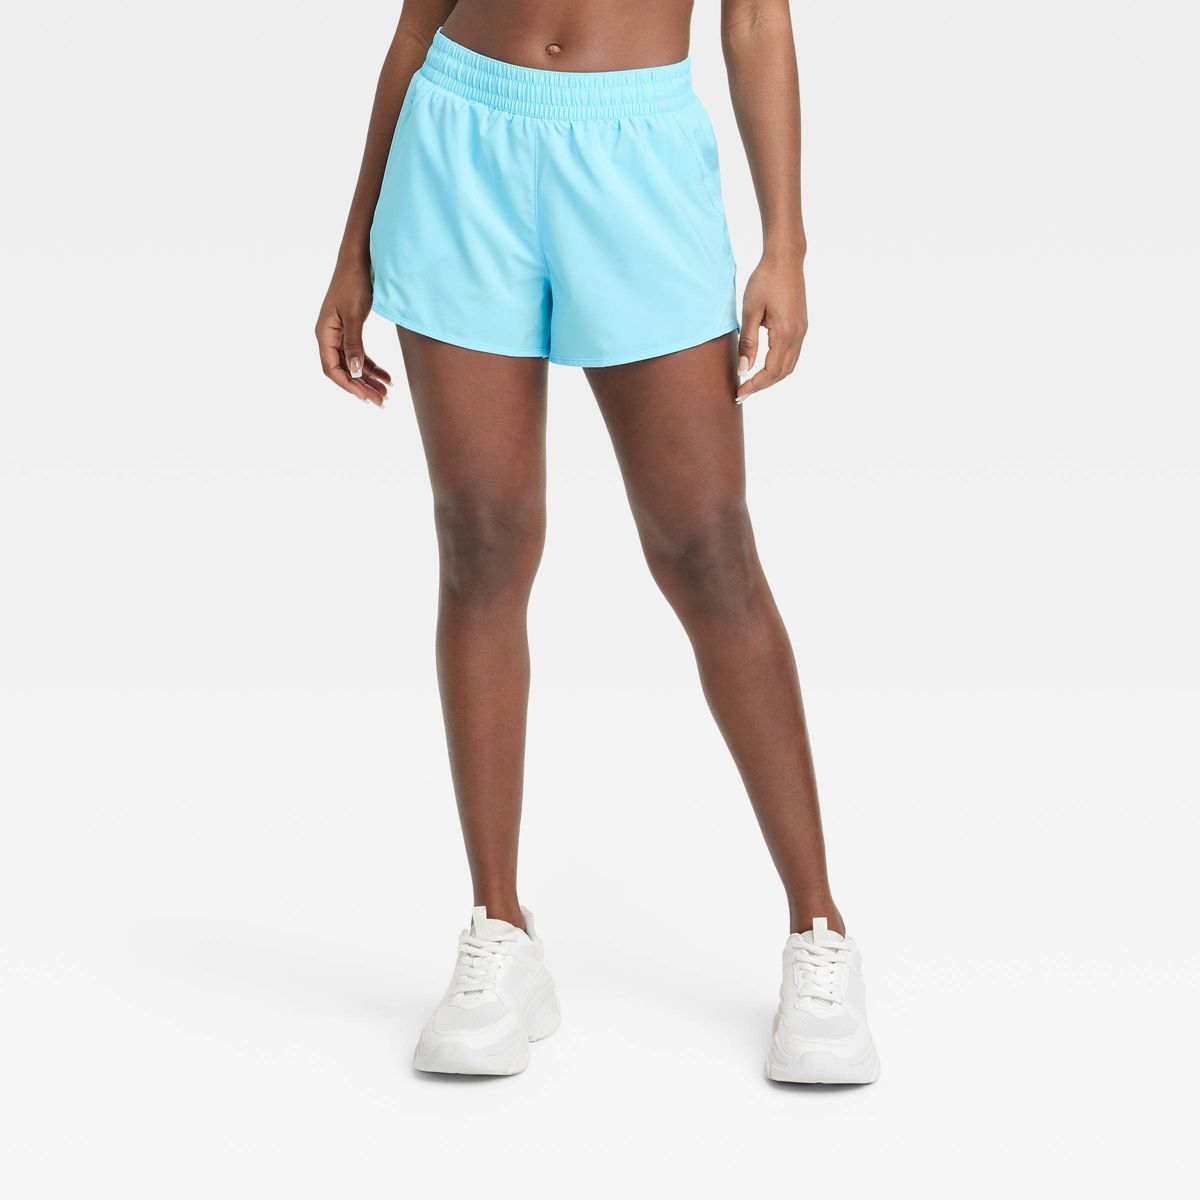 Women's Woven Mid-Rise Run Shorts 3" - All In Motion™ Light Blue M | Target